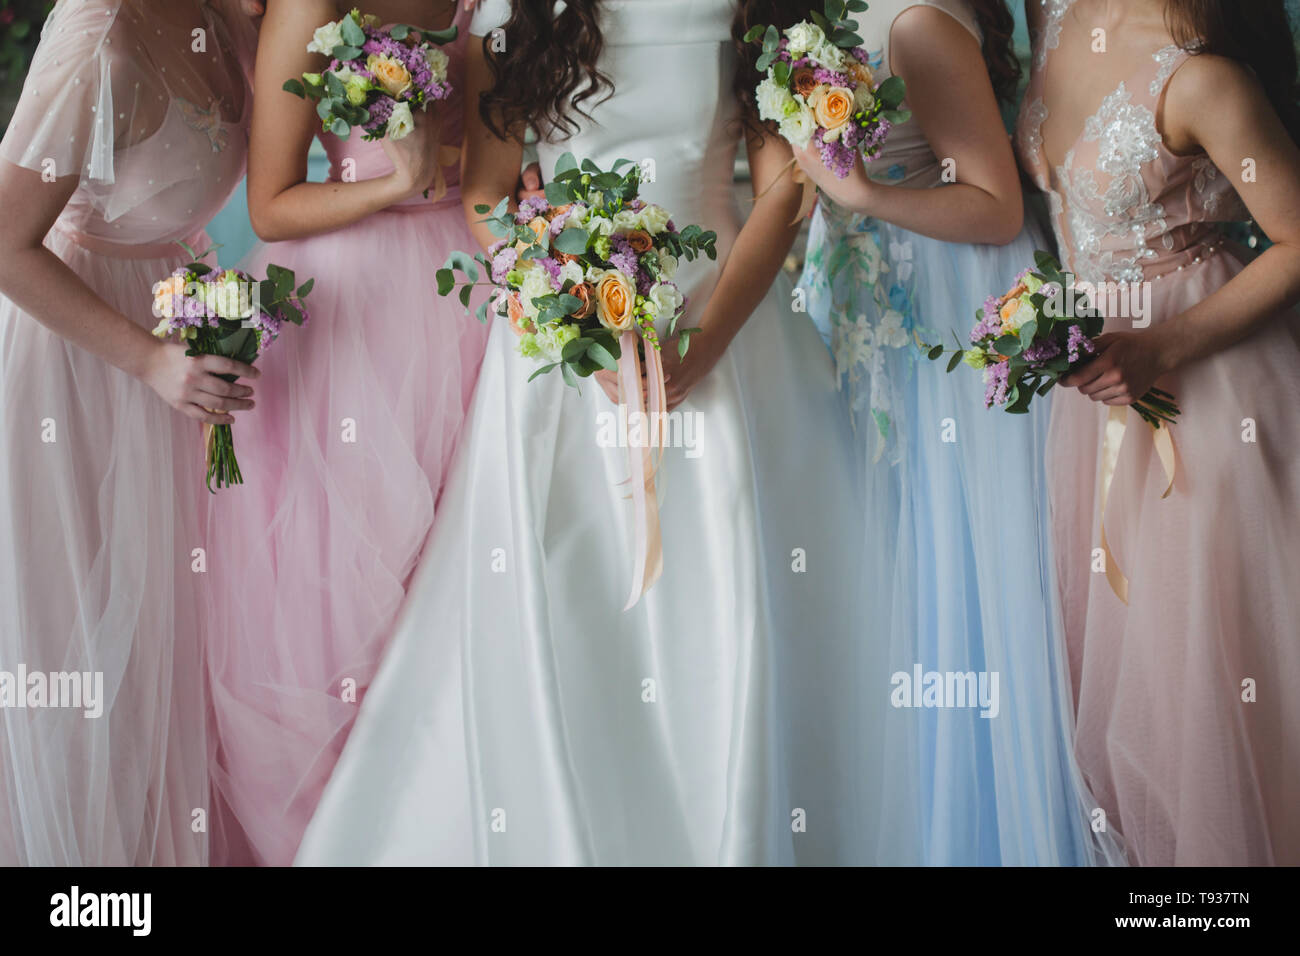 Bride and bridesmaids. Beautiful young women in dresses and with bouquets of fresh flowers. Stock Photo